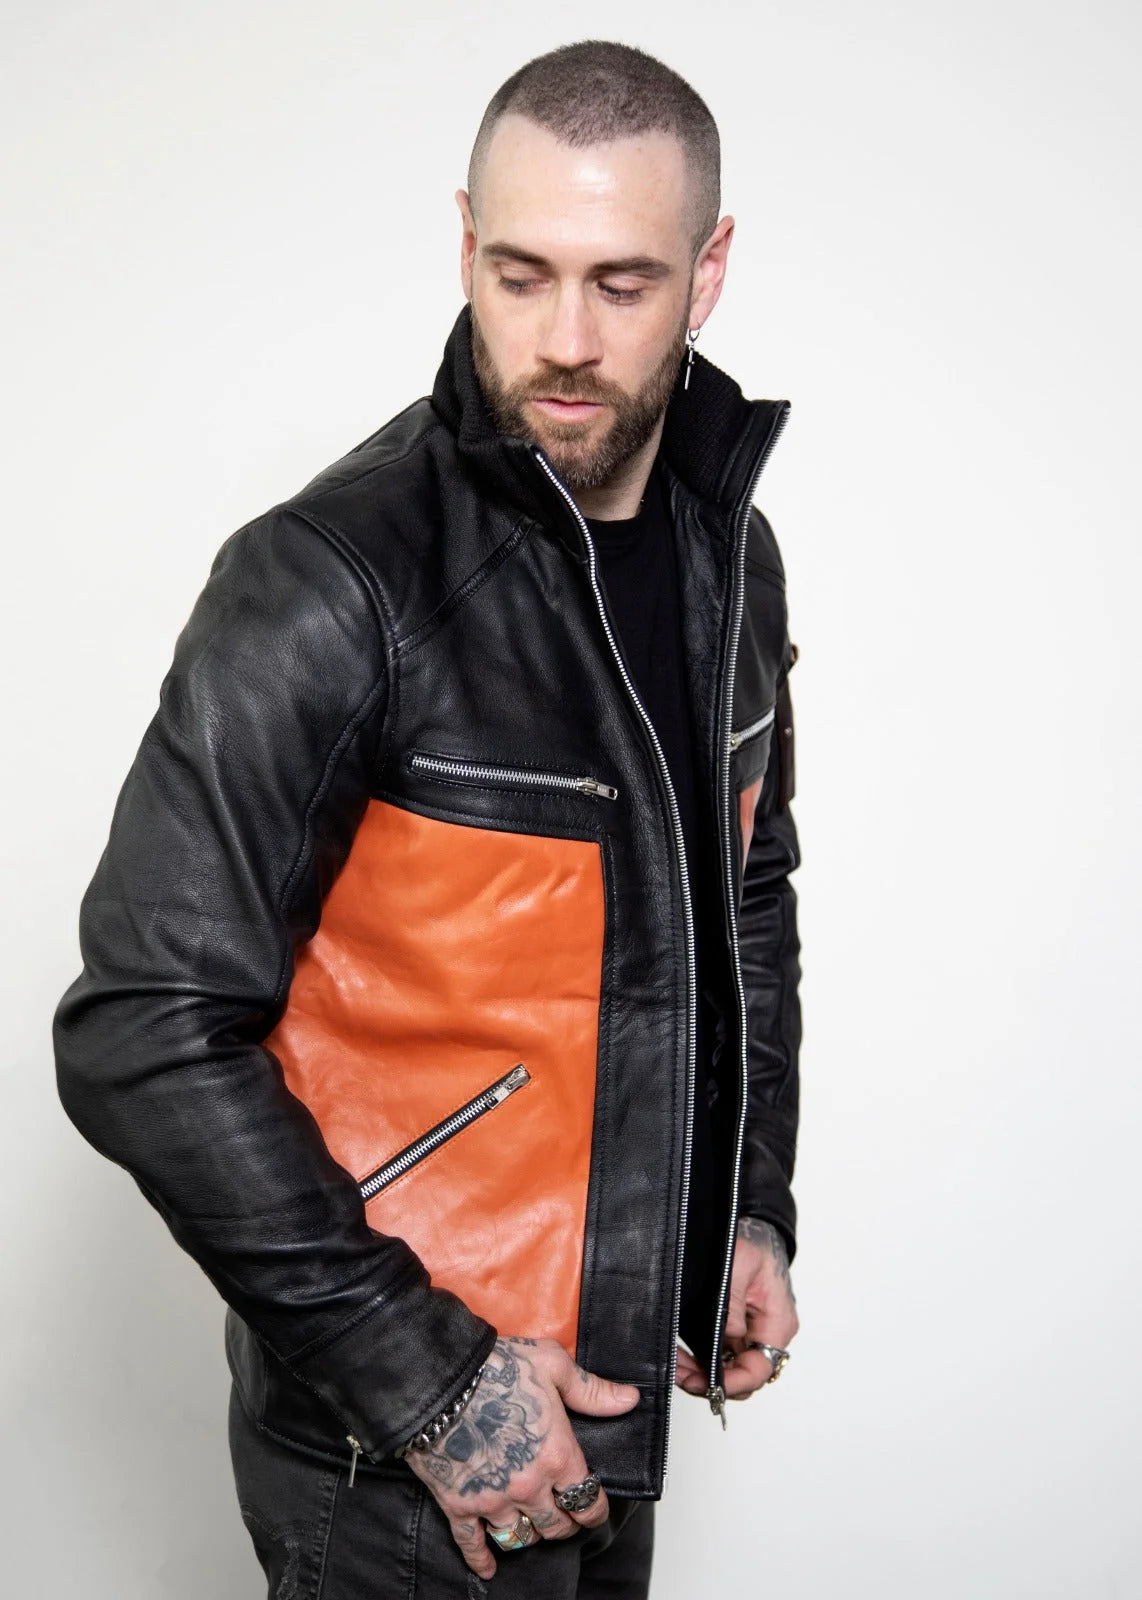 Load image into Gallery viewer, Naruto Shippuden Orange Leather Jacket by Luca Designs
